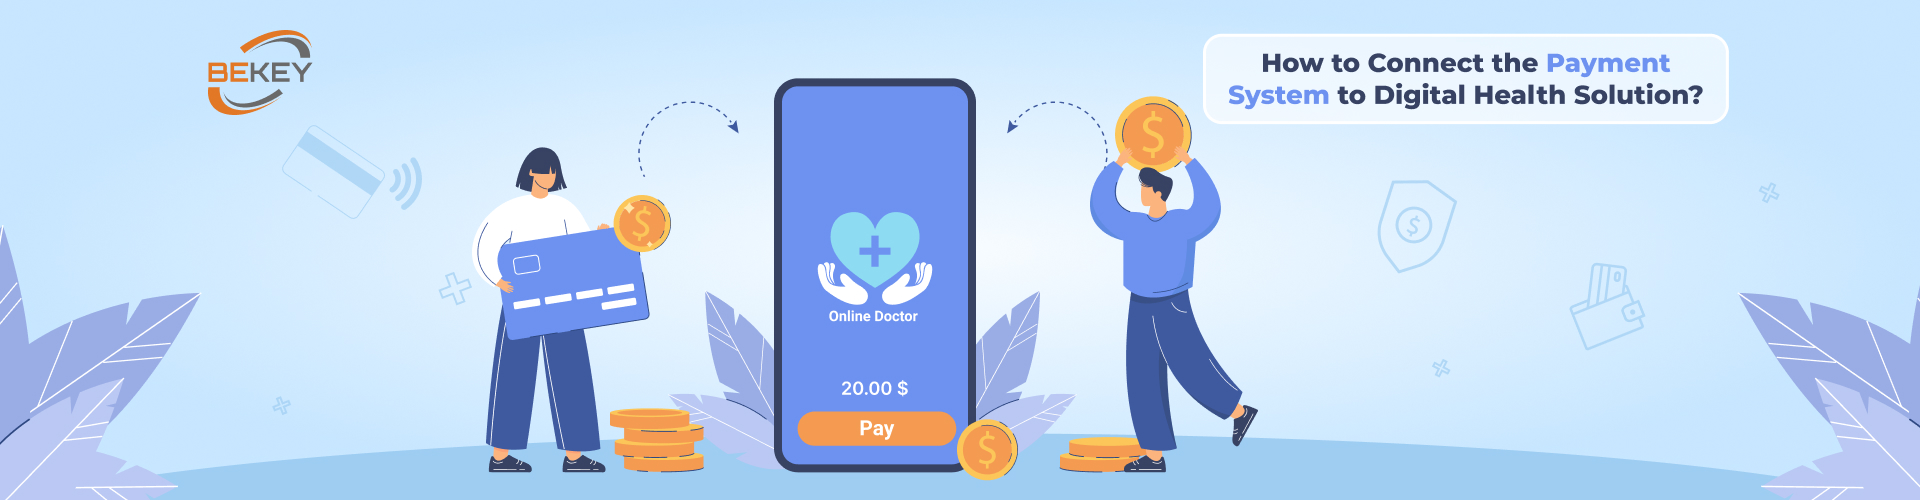 How to Connect the Payment System to Digital Health Solution? - image